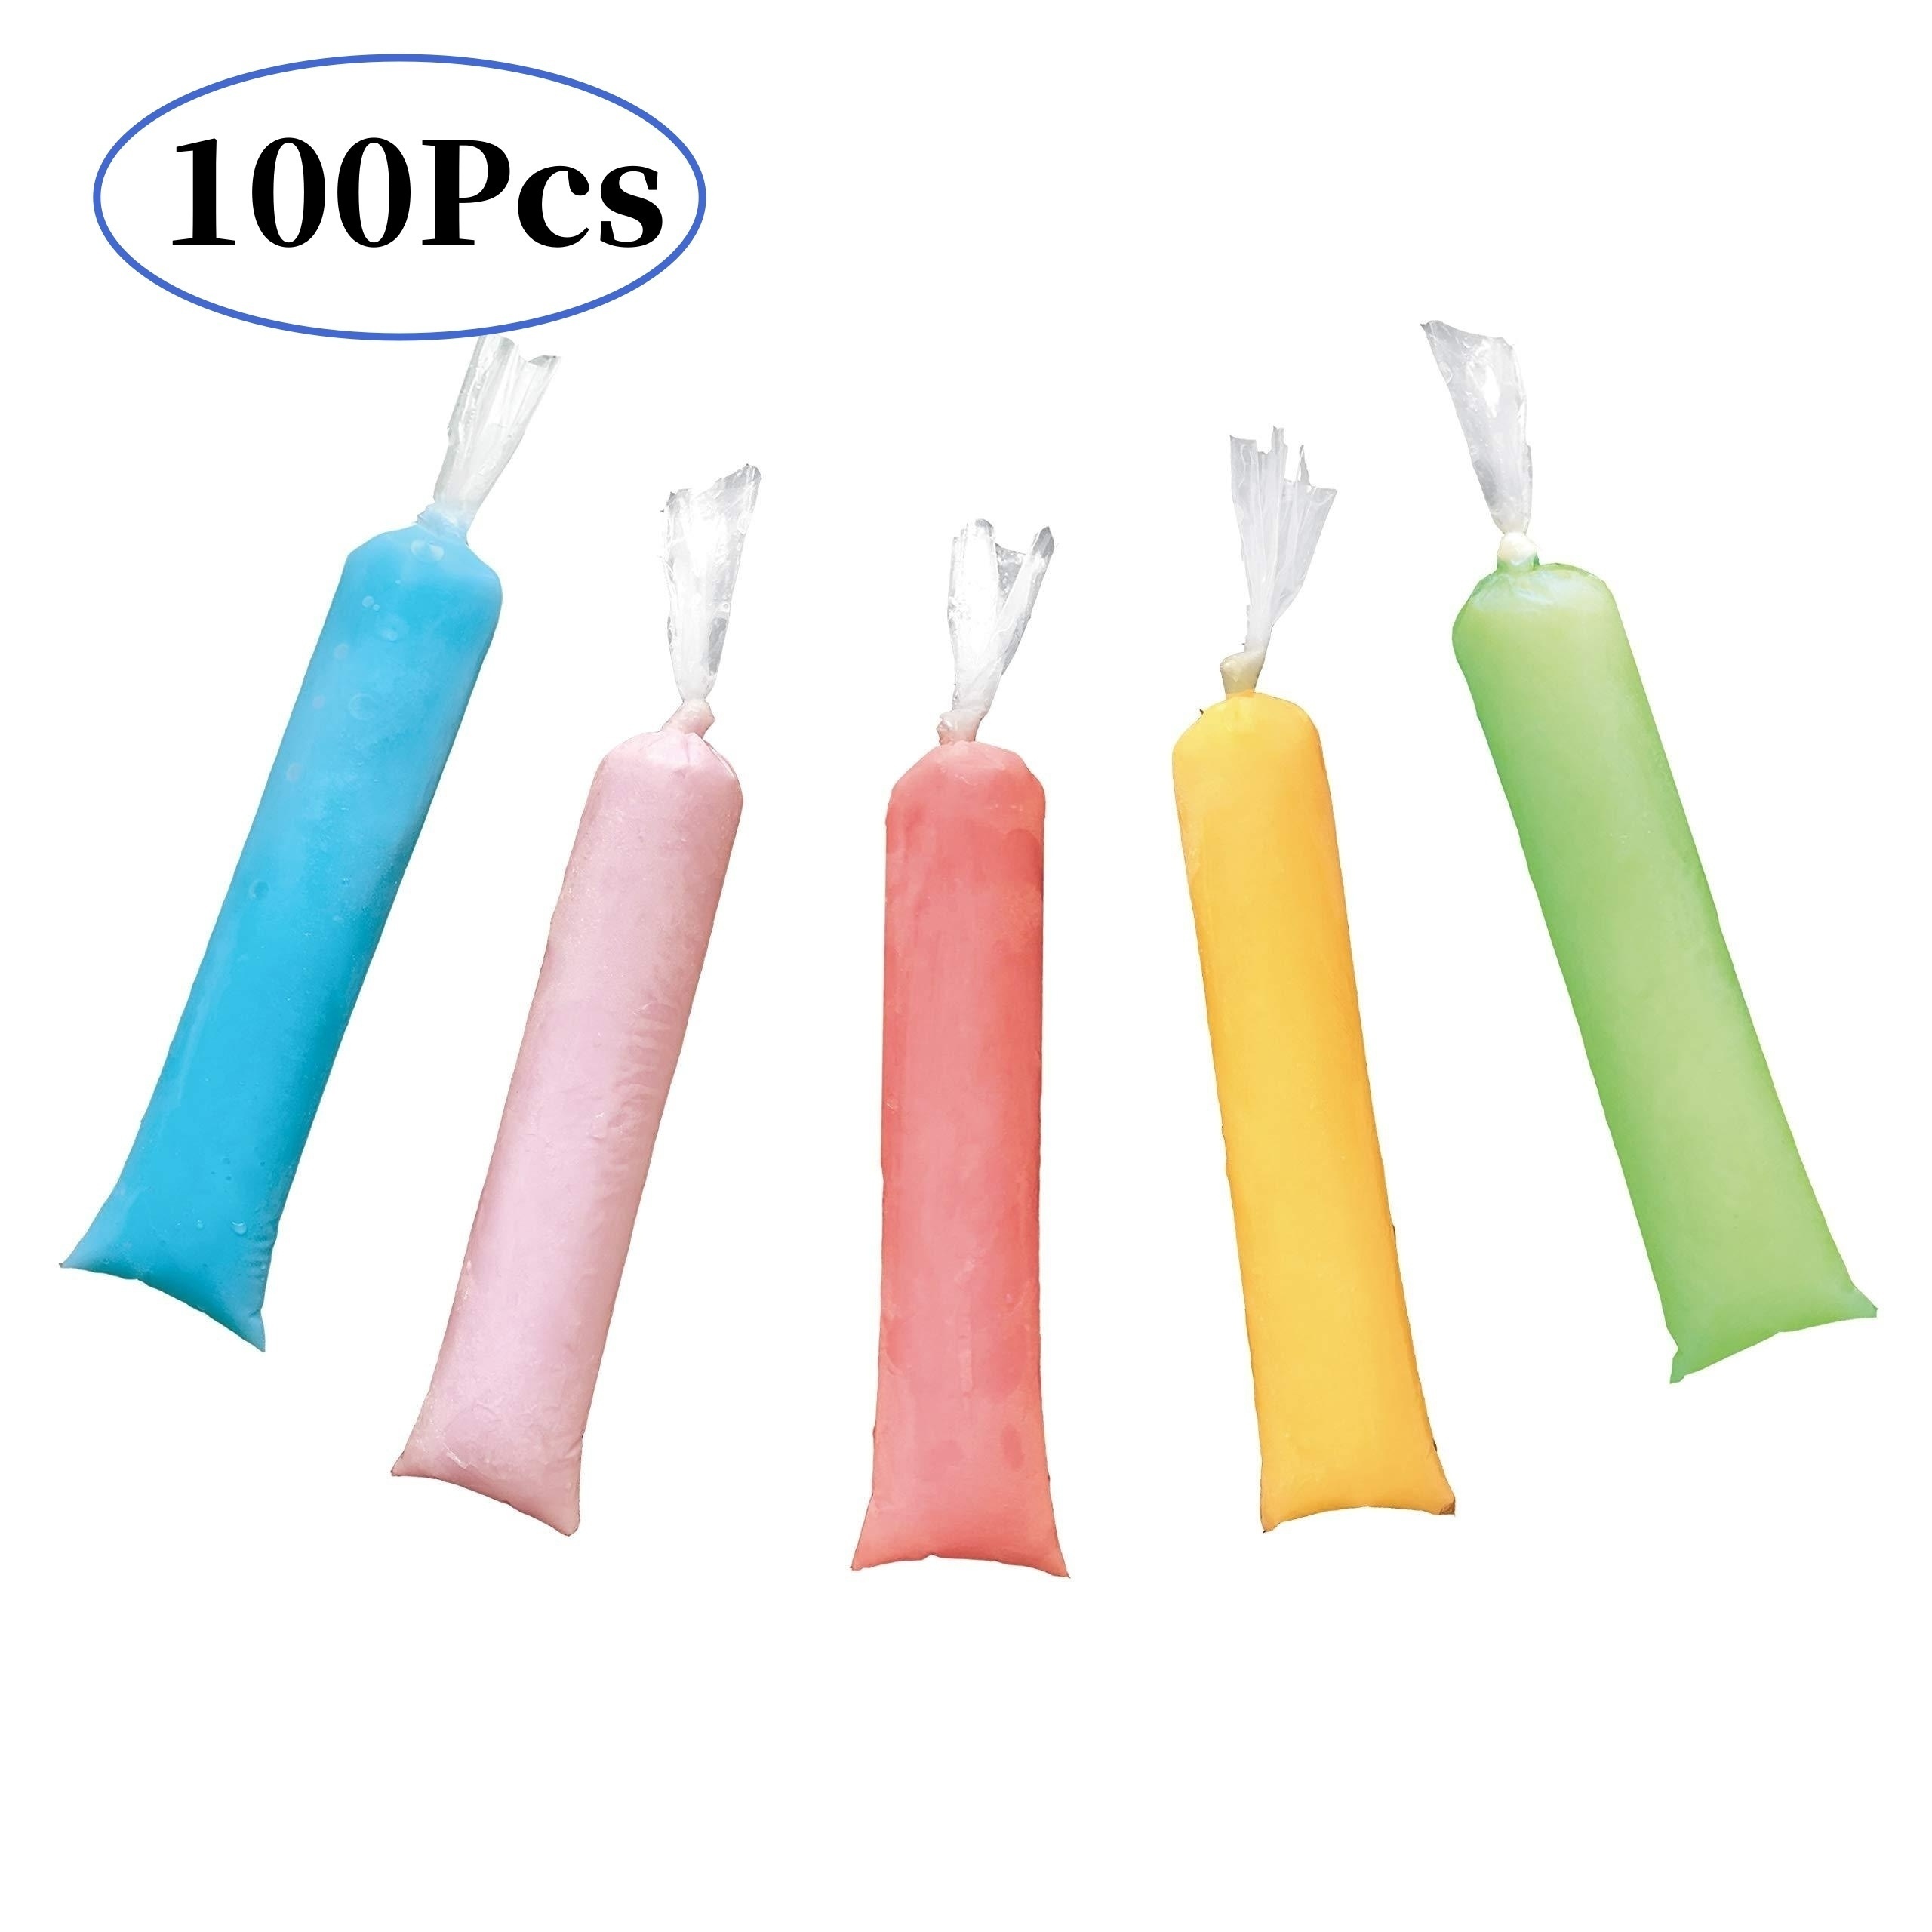 

100pcs, Disposable Popsicle Mold Bags, Popsicle Bags For Healthy Snacks, Yogurt Sticks, Rock Sugar, Juice And Fruit Smoothies, Popsicles, Self Sealing Diy Popsicle Packaging Bags, Kitchen Accessories